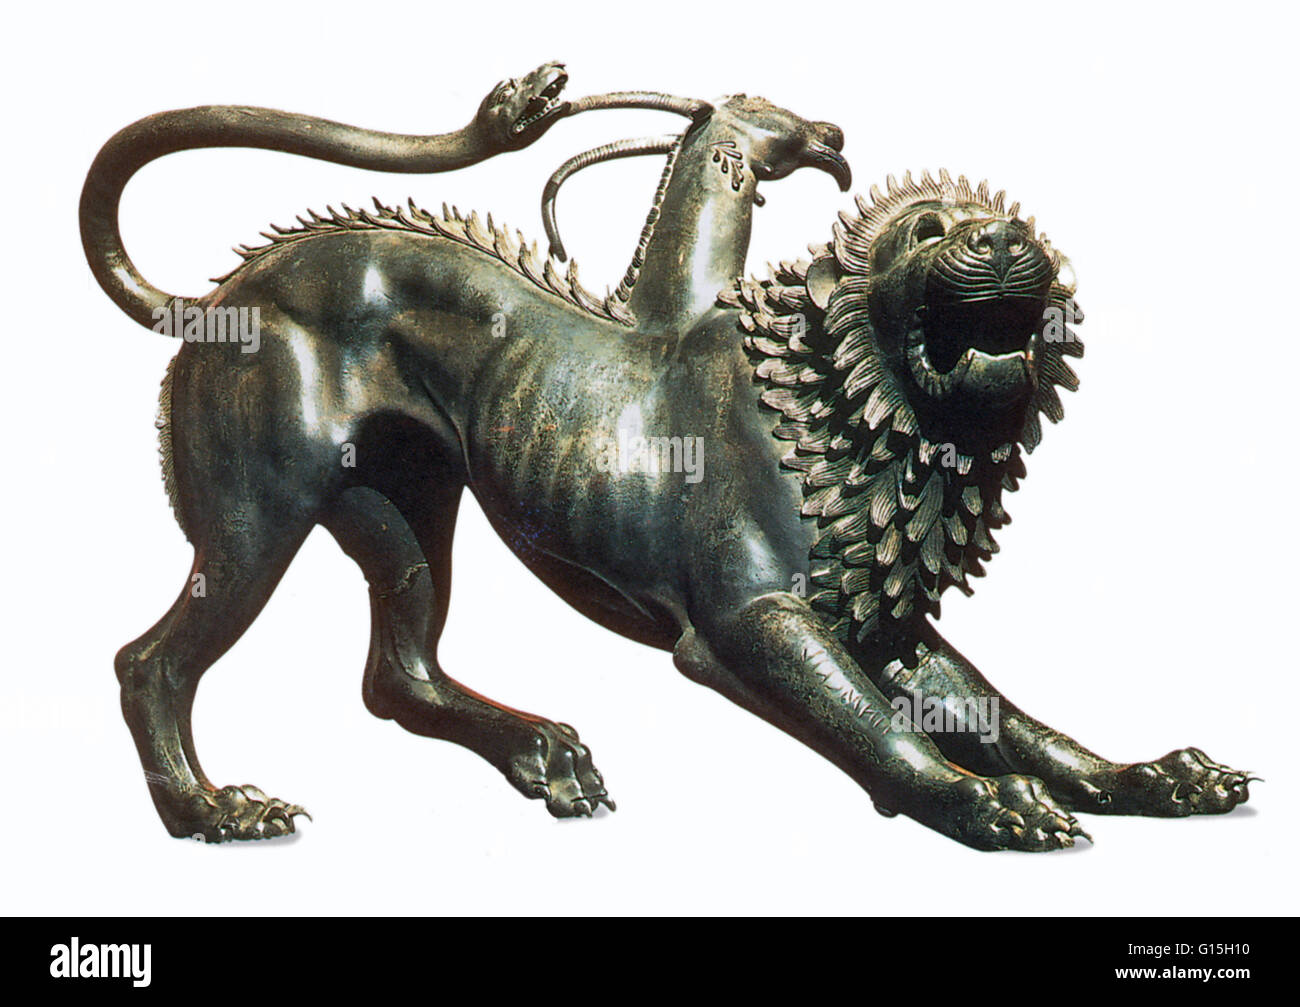 The Chimera of Arezzo, a 5th century B.C. bronze sculpture, is one of the best known examples of Etruscan art. The Chimera is a creature belonging to Greek mythology, comprising multiple animal parts (lion, goat and snake). Stock Photo